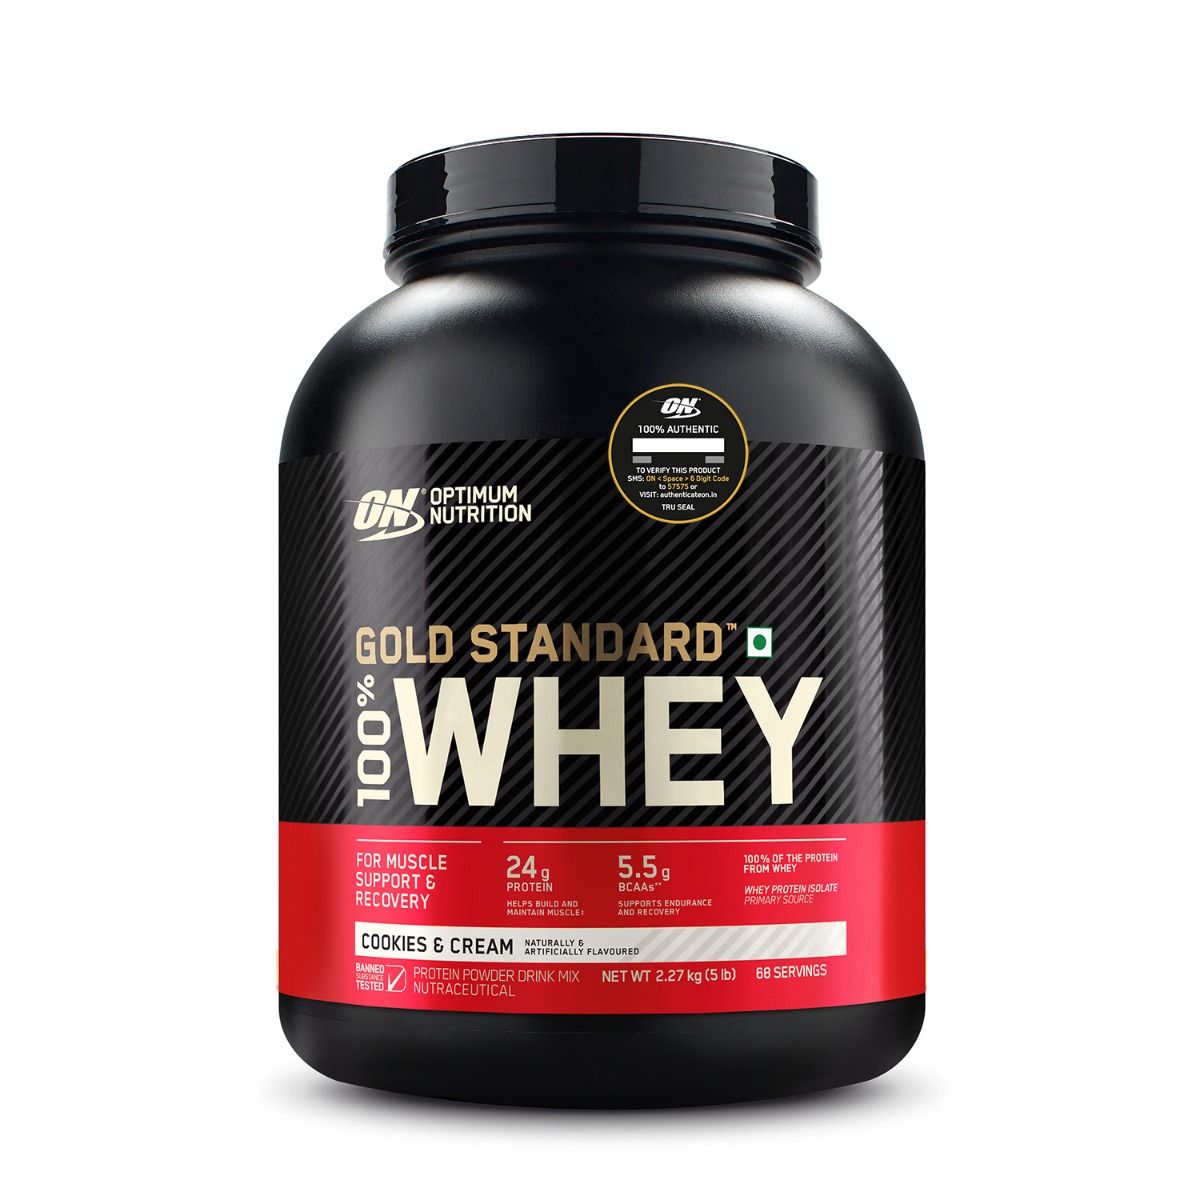 Optimum Nutrition (ON) Gold Standard 100% Whey Protein Cookies & Cream Flavour Powder, 5 lb, Pack of 1 